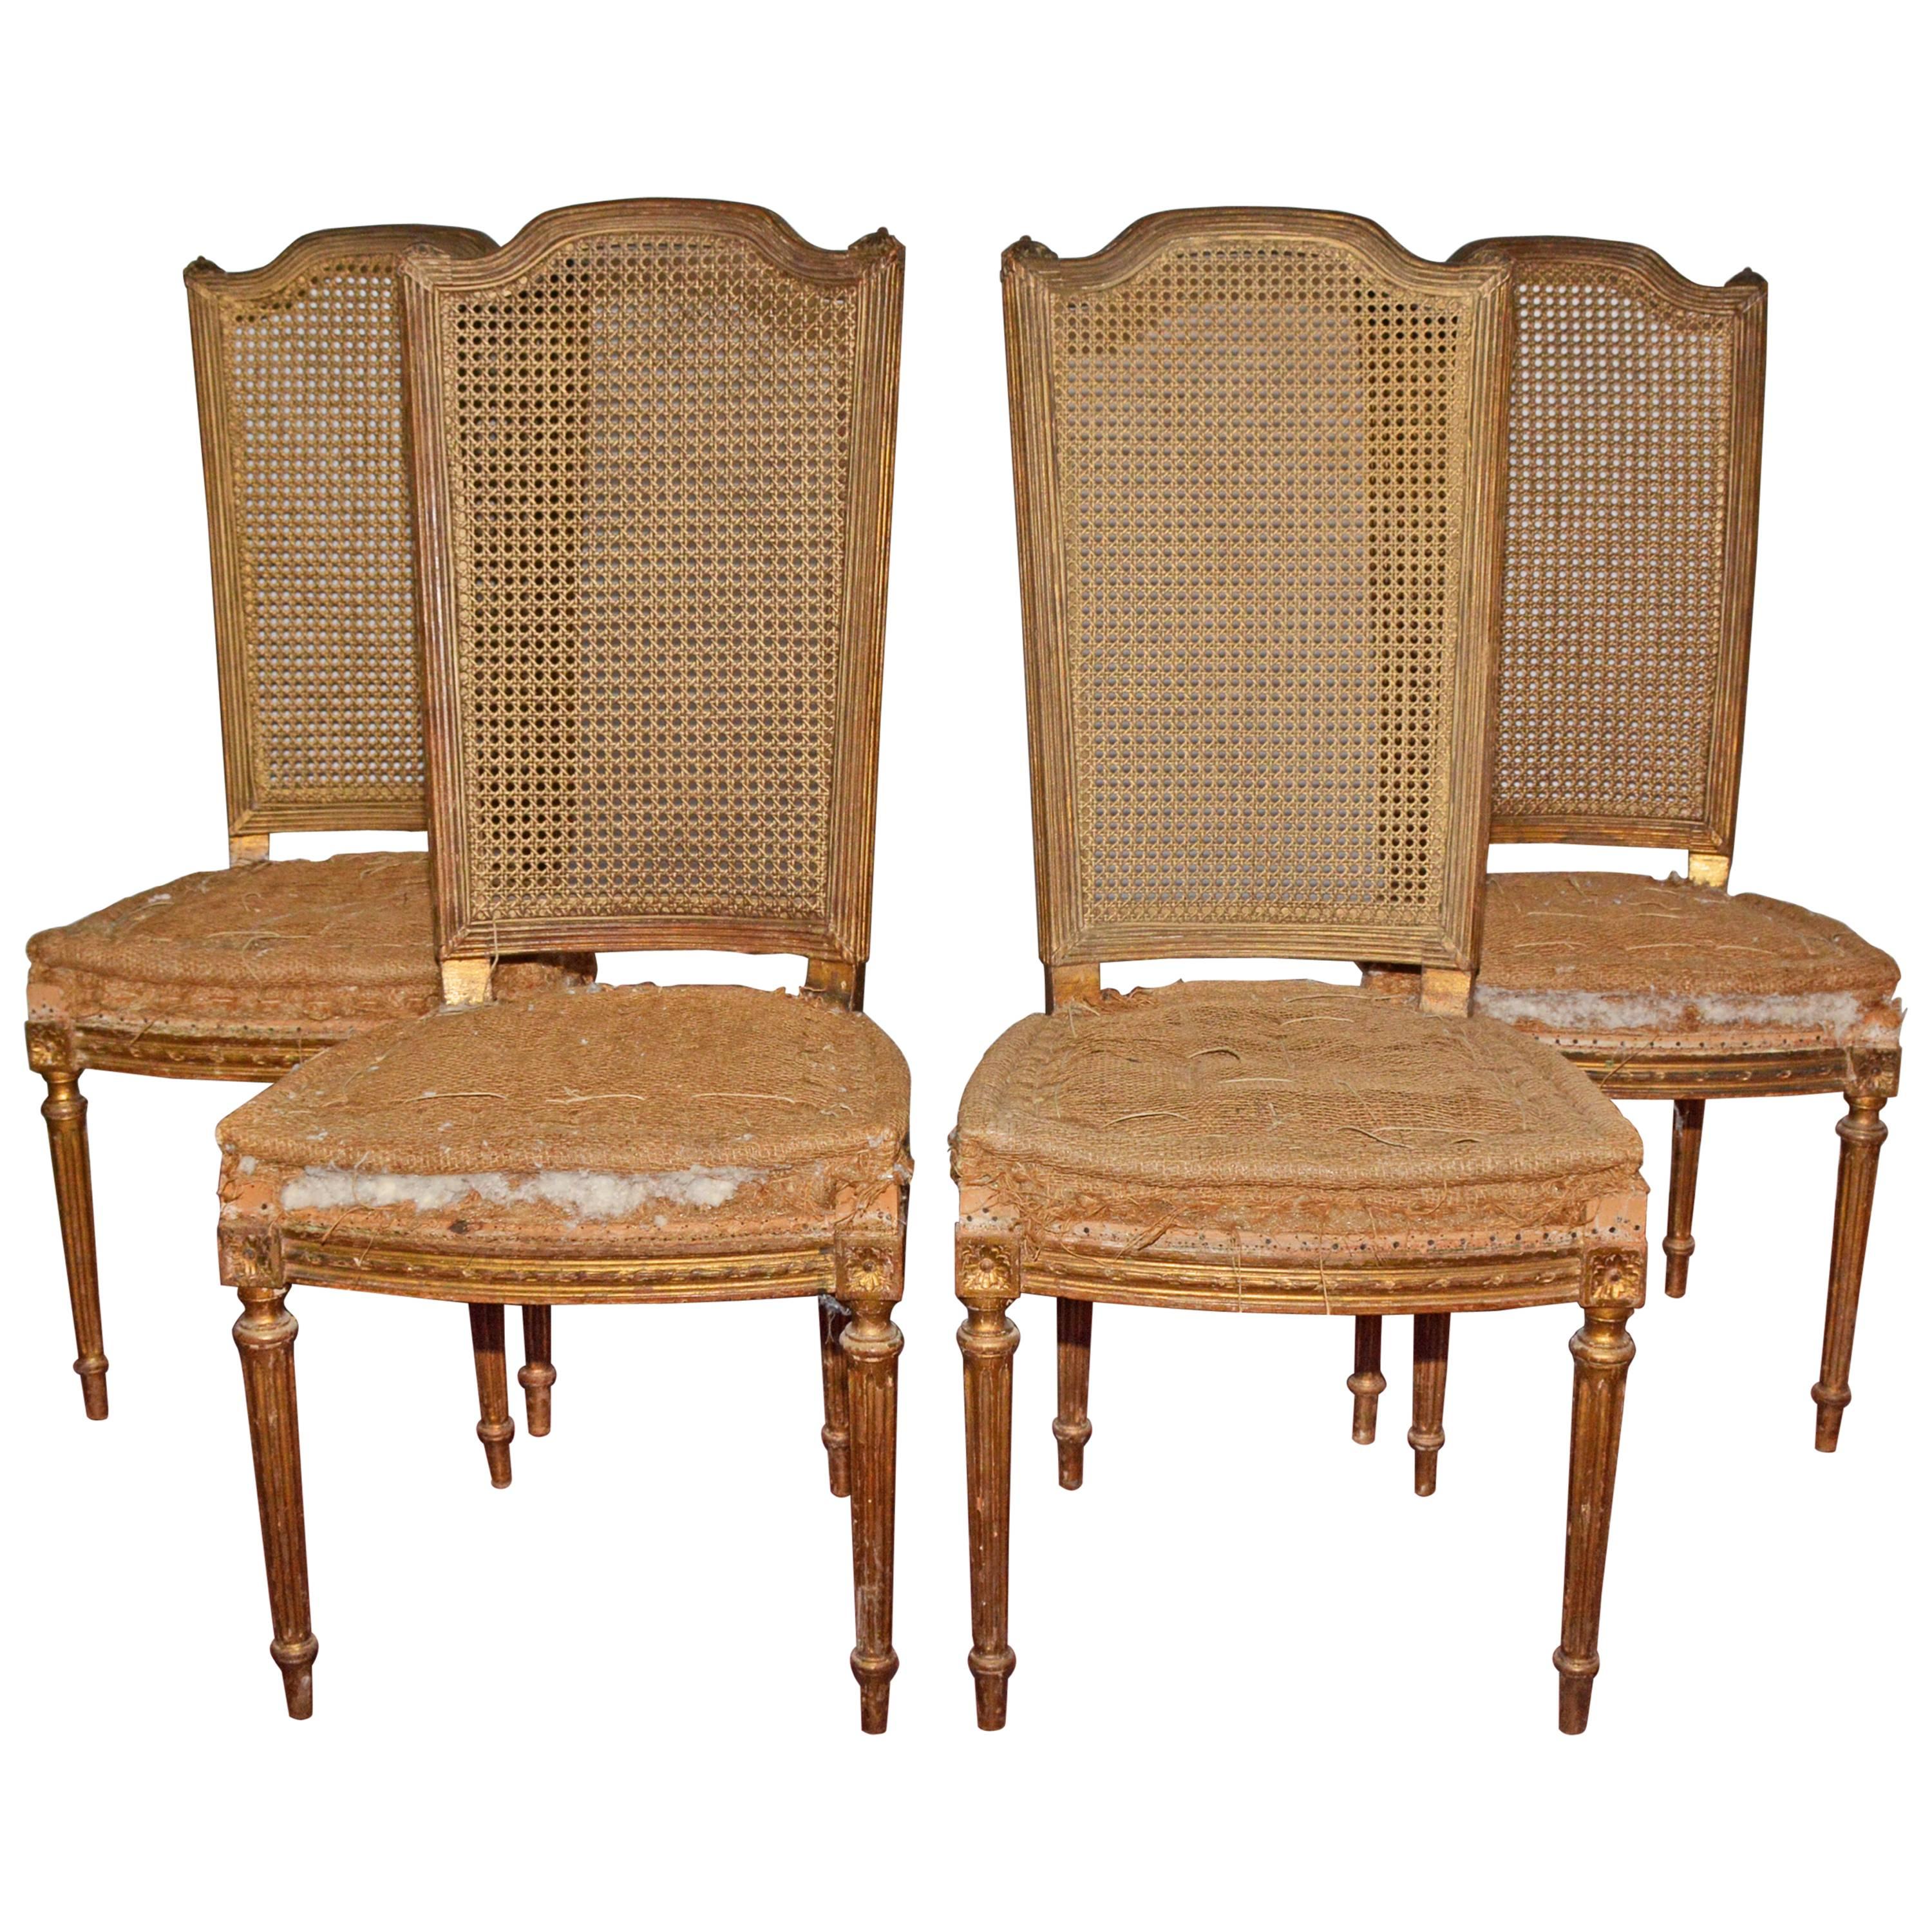 Four Vintage Louis XVI Style Dining Chairs